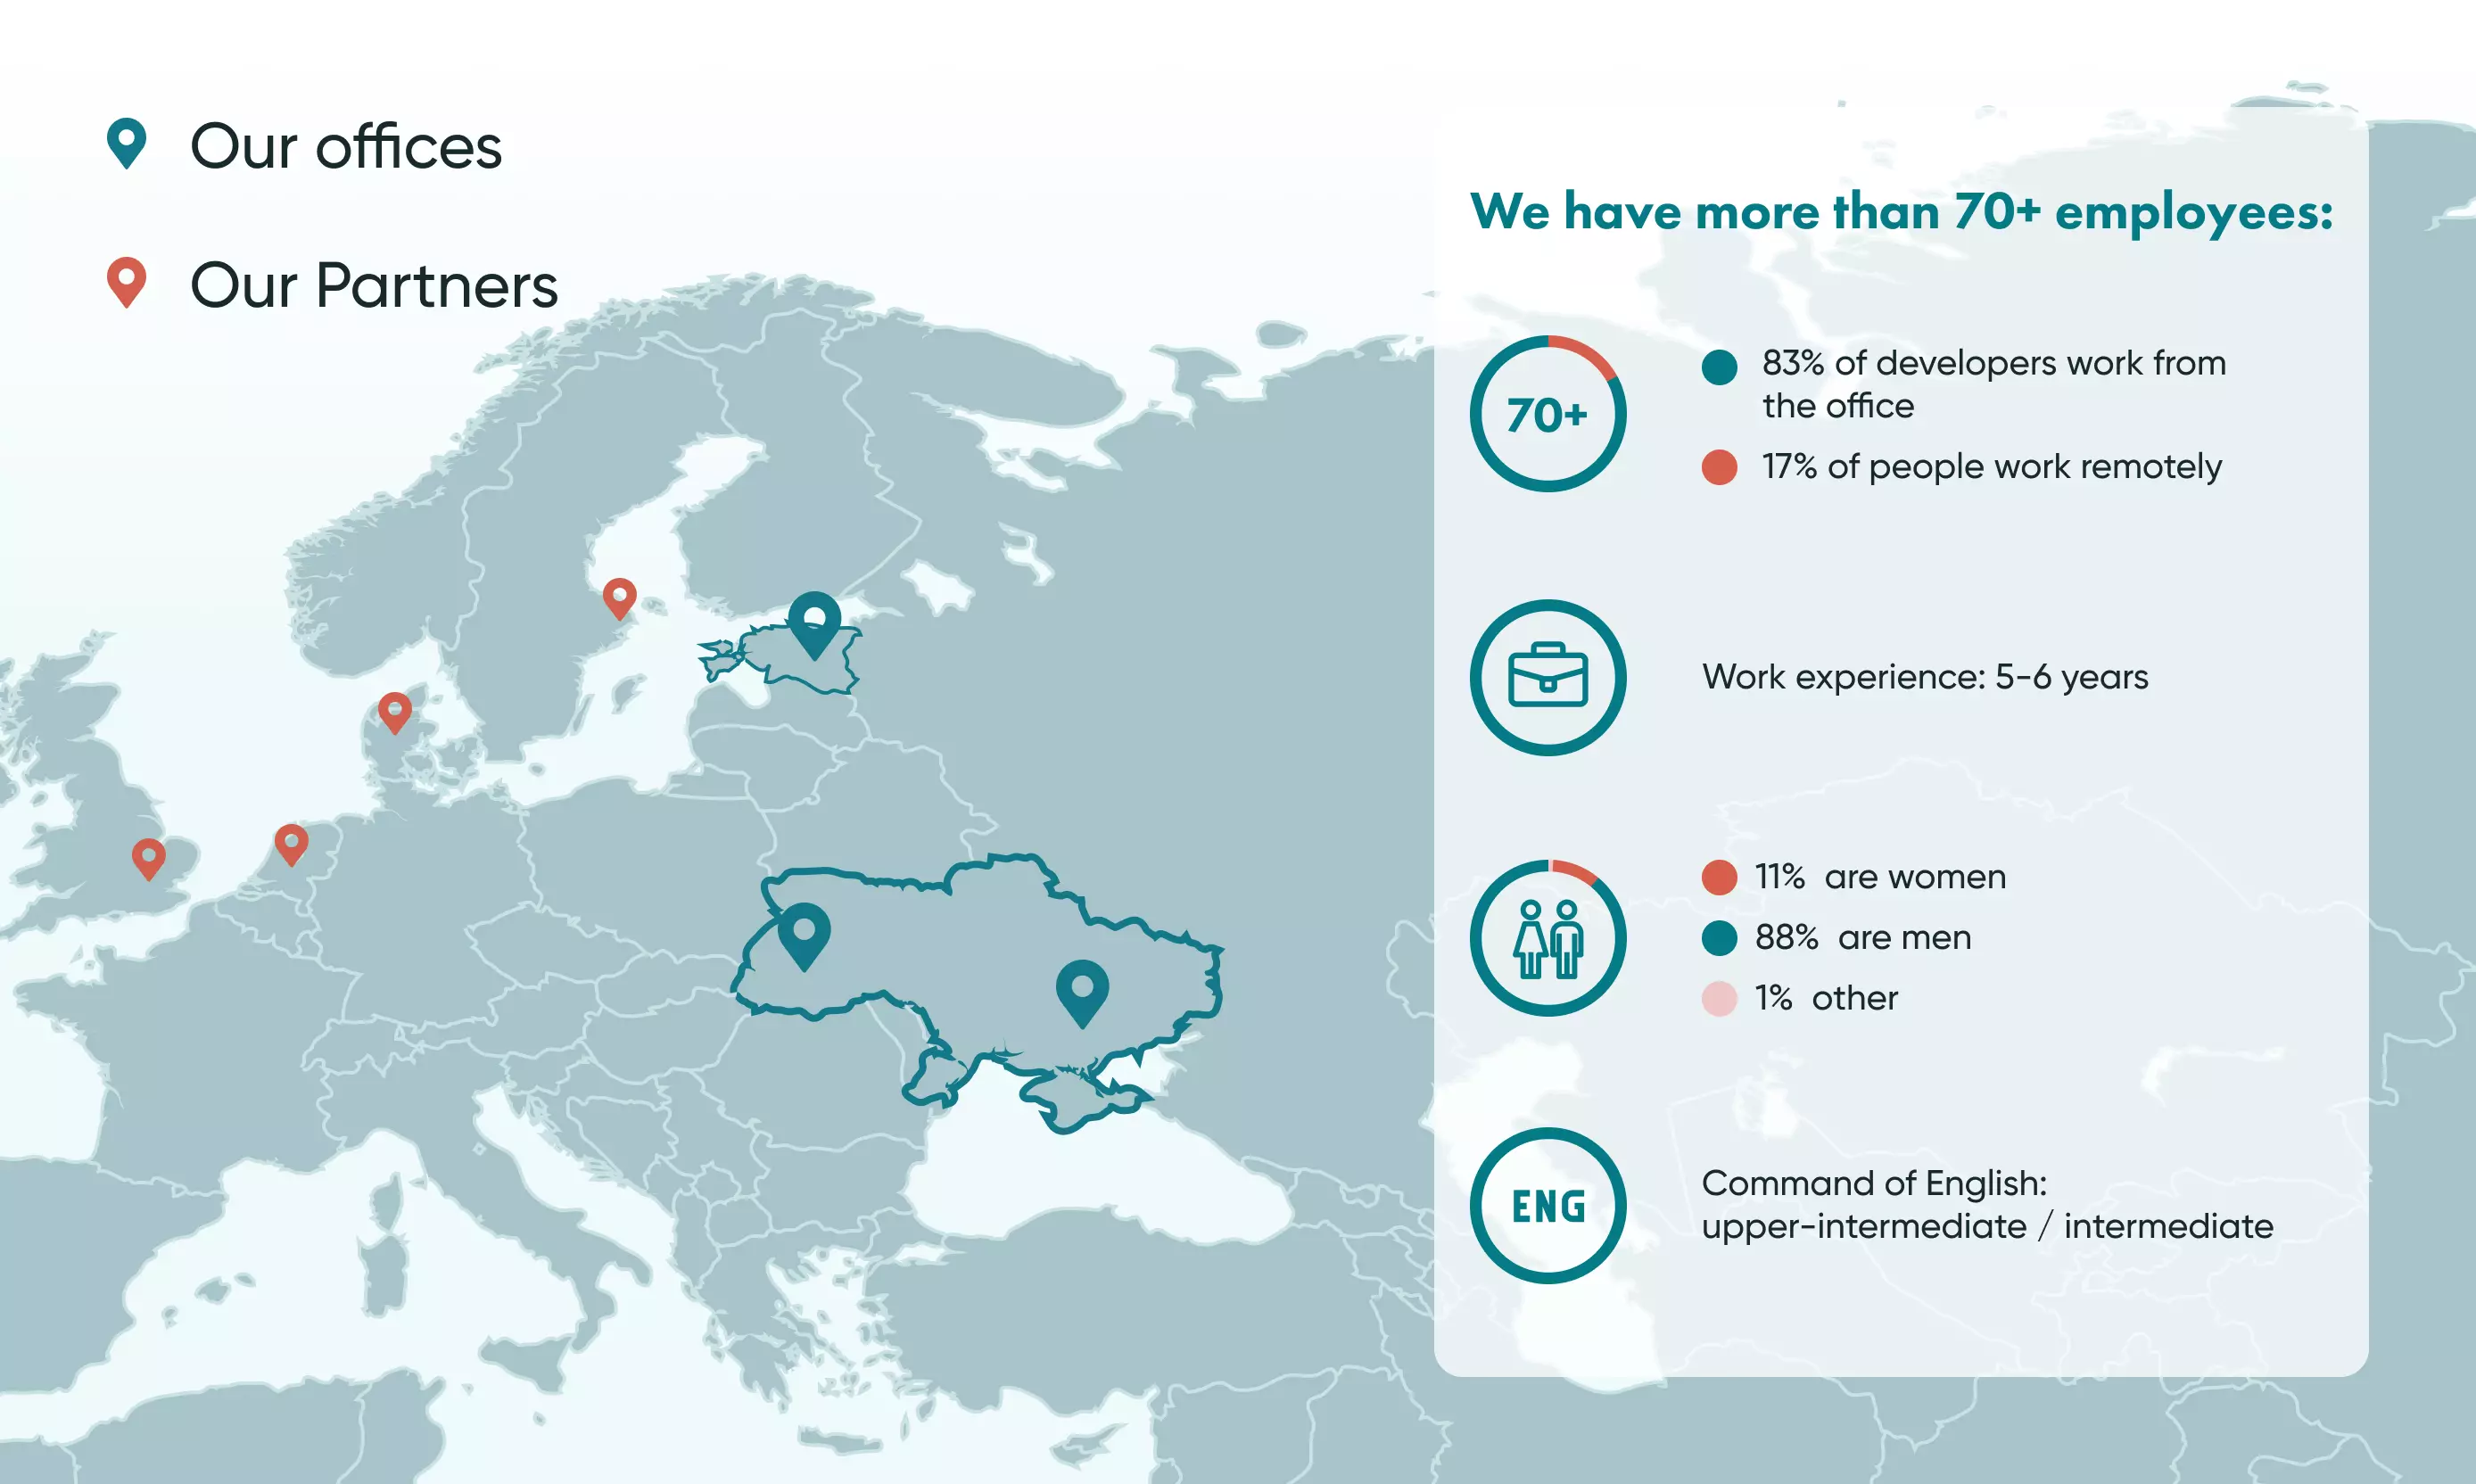 A brief view of our span of geographical coverage. We also have plans to continue our expansion and open offices across Europe. With more than 70 epmloyees and rising, we are well positioned to deliver on projects big and small.